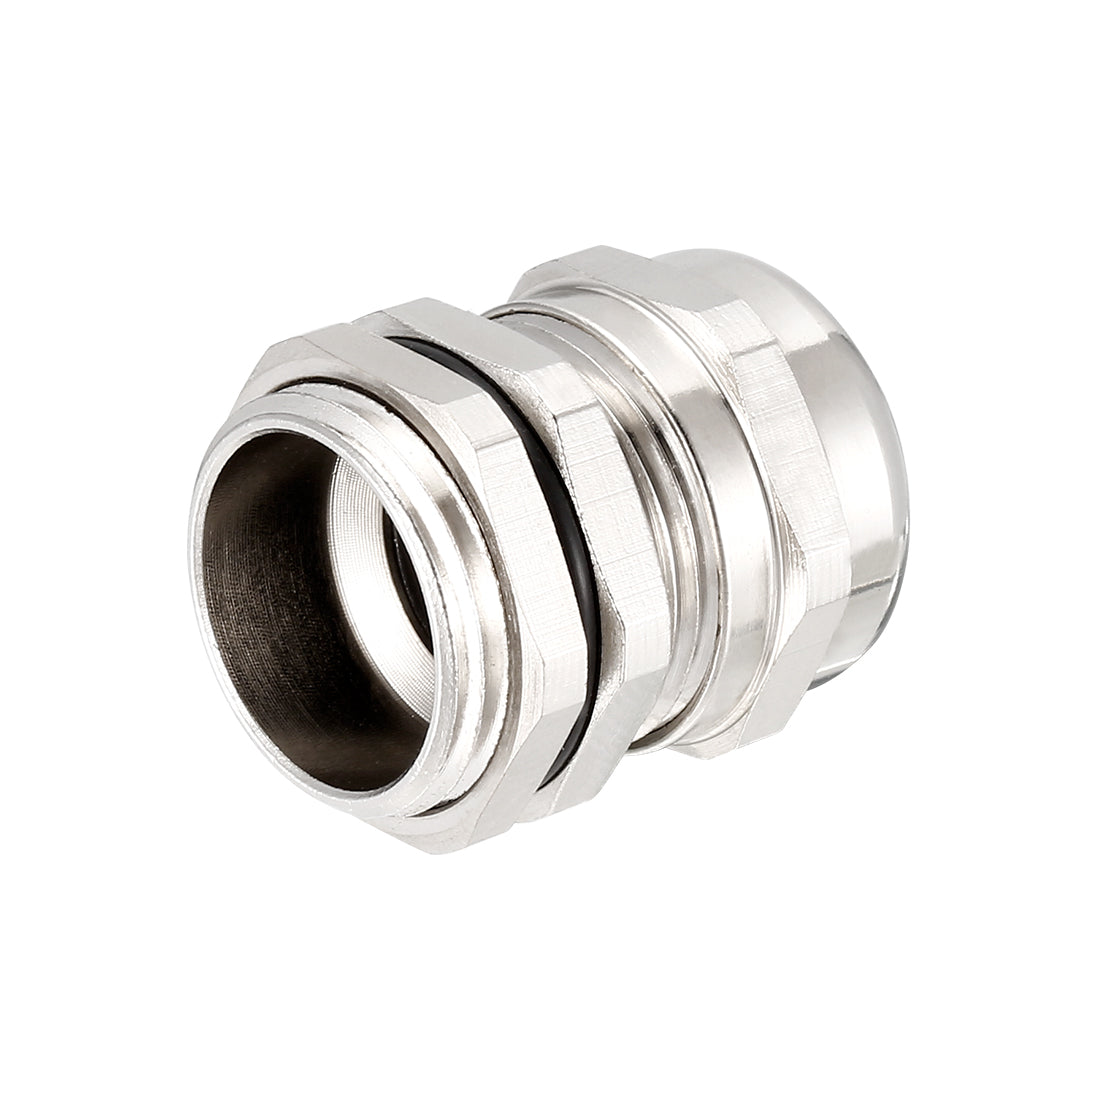 uxcell Uxcell M20 Cable Gland Metal Waterproof Connector Wire Glands Joints for 6mm-12mm Dia Range